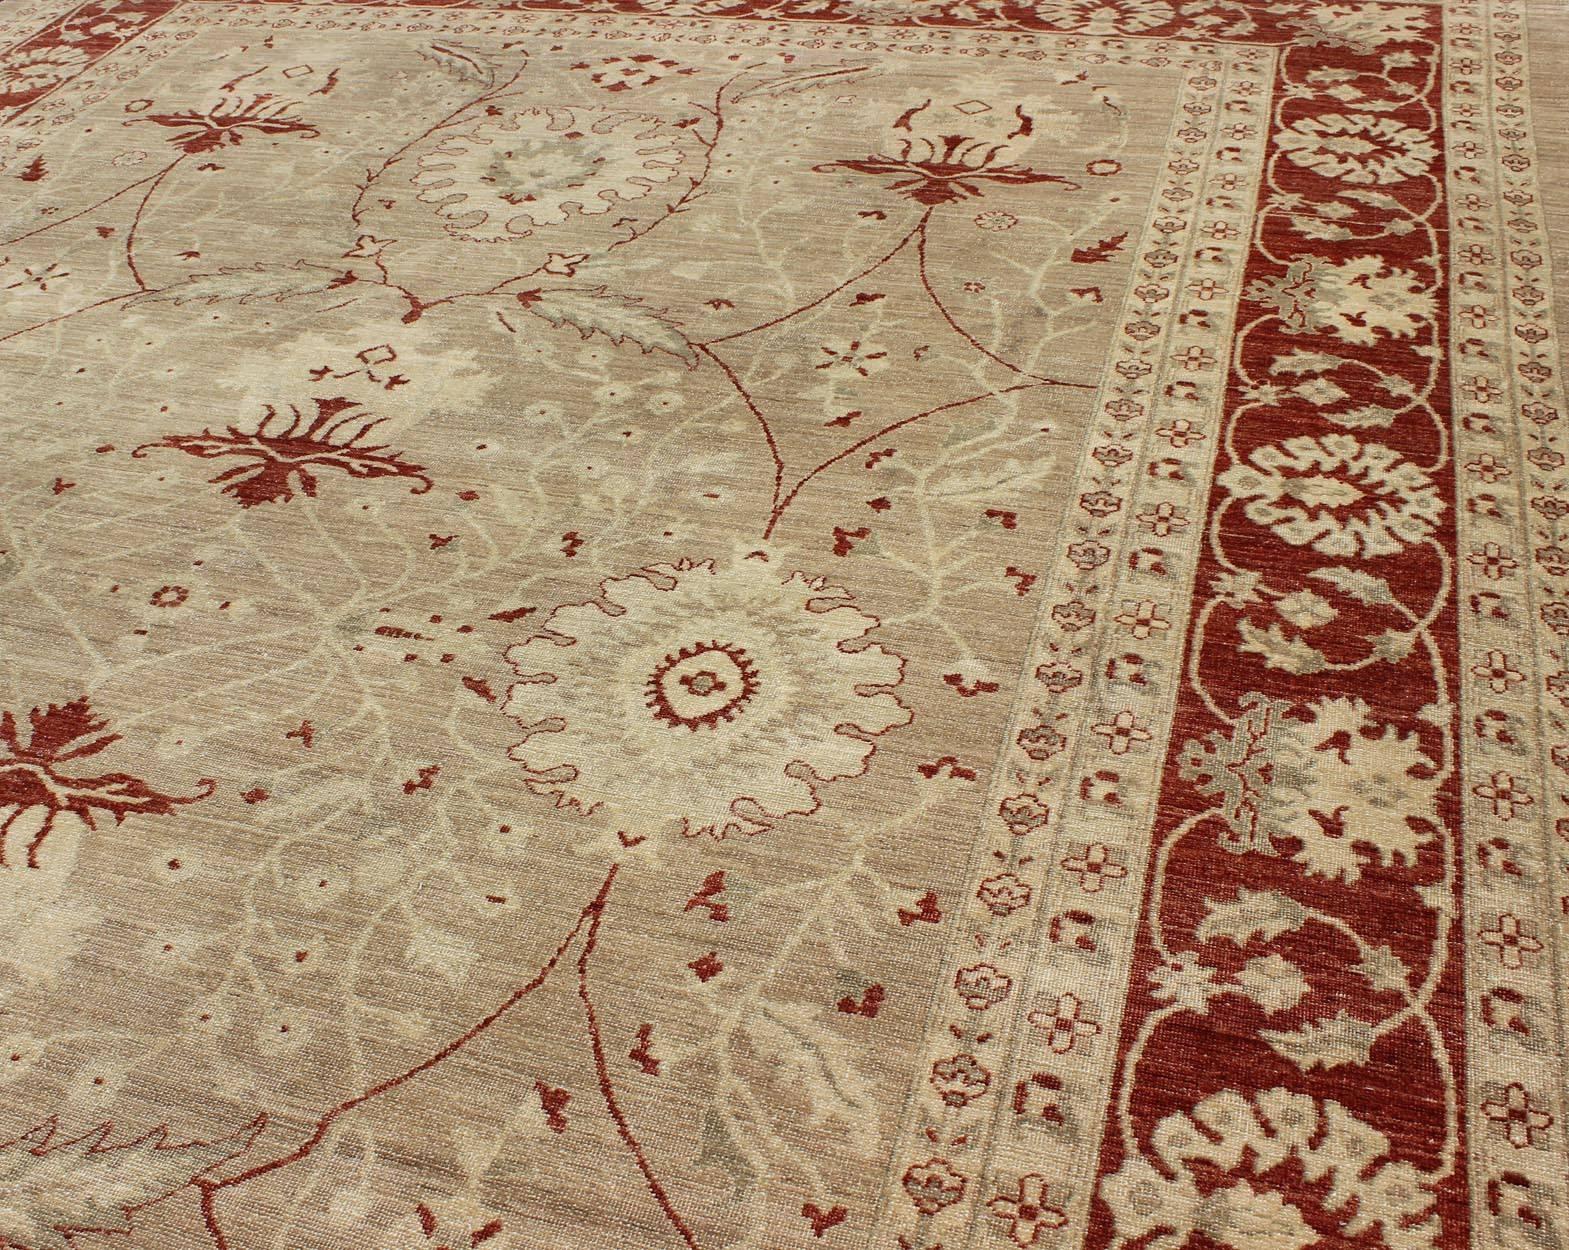 Sultanabad Design Rug with Stylized Design in Light Camel, Cream & Garnet Red For Sale 2